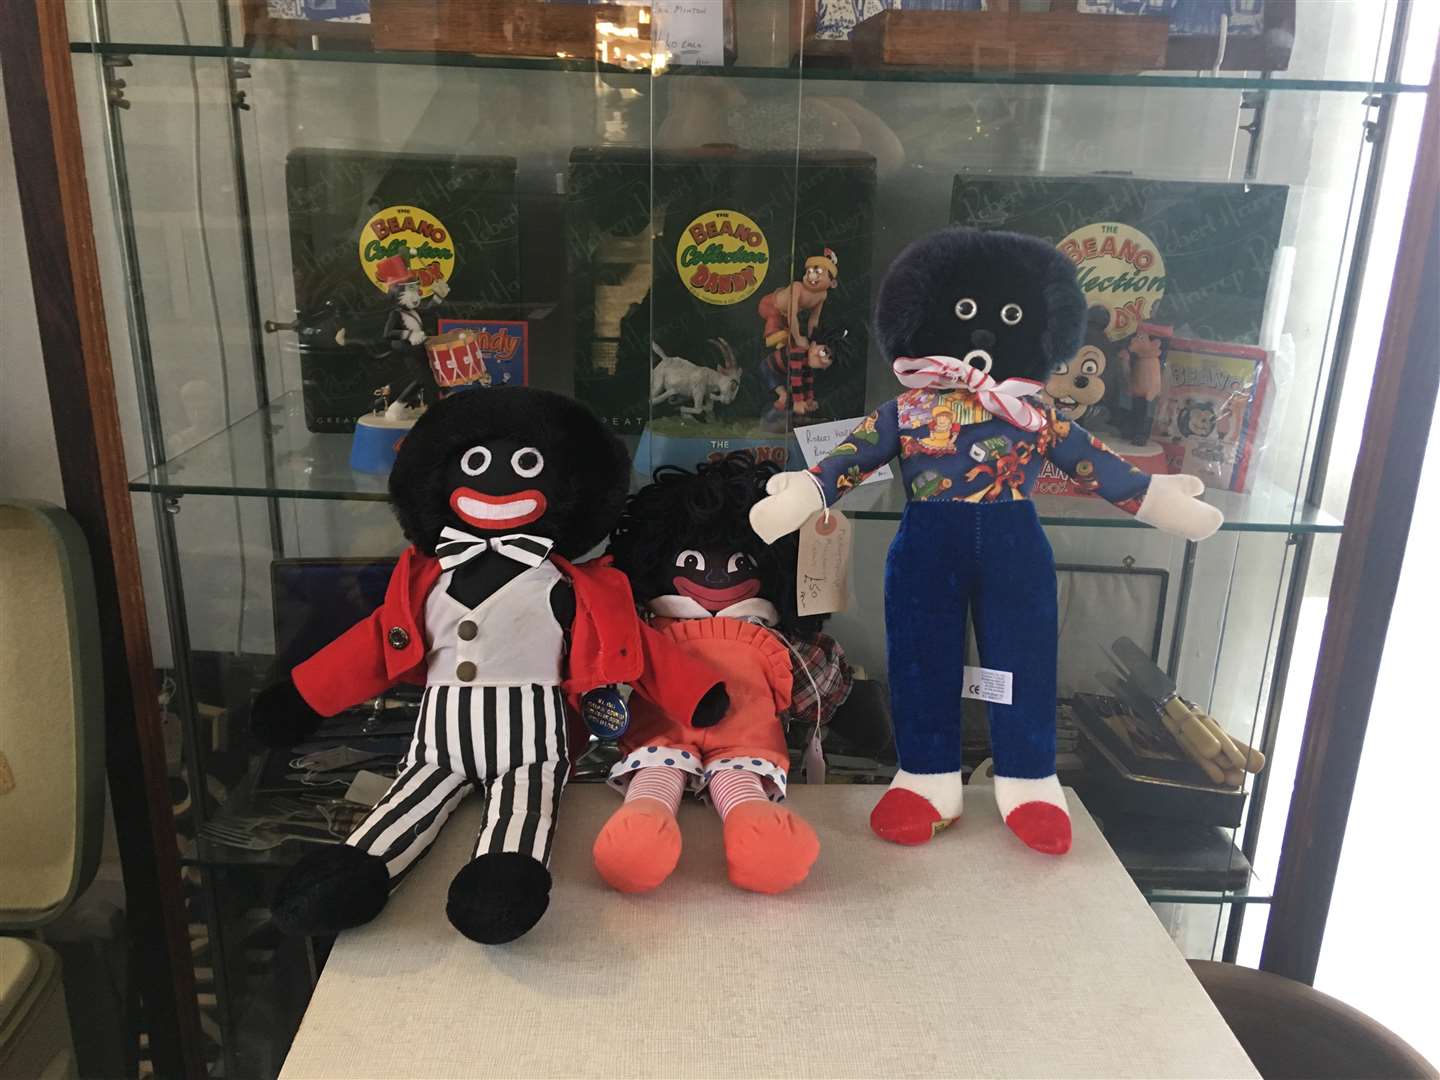 Golliwog dolls for sale at Upstairs Downstairs in Faversham